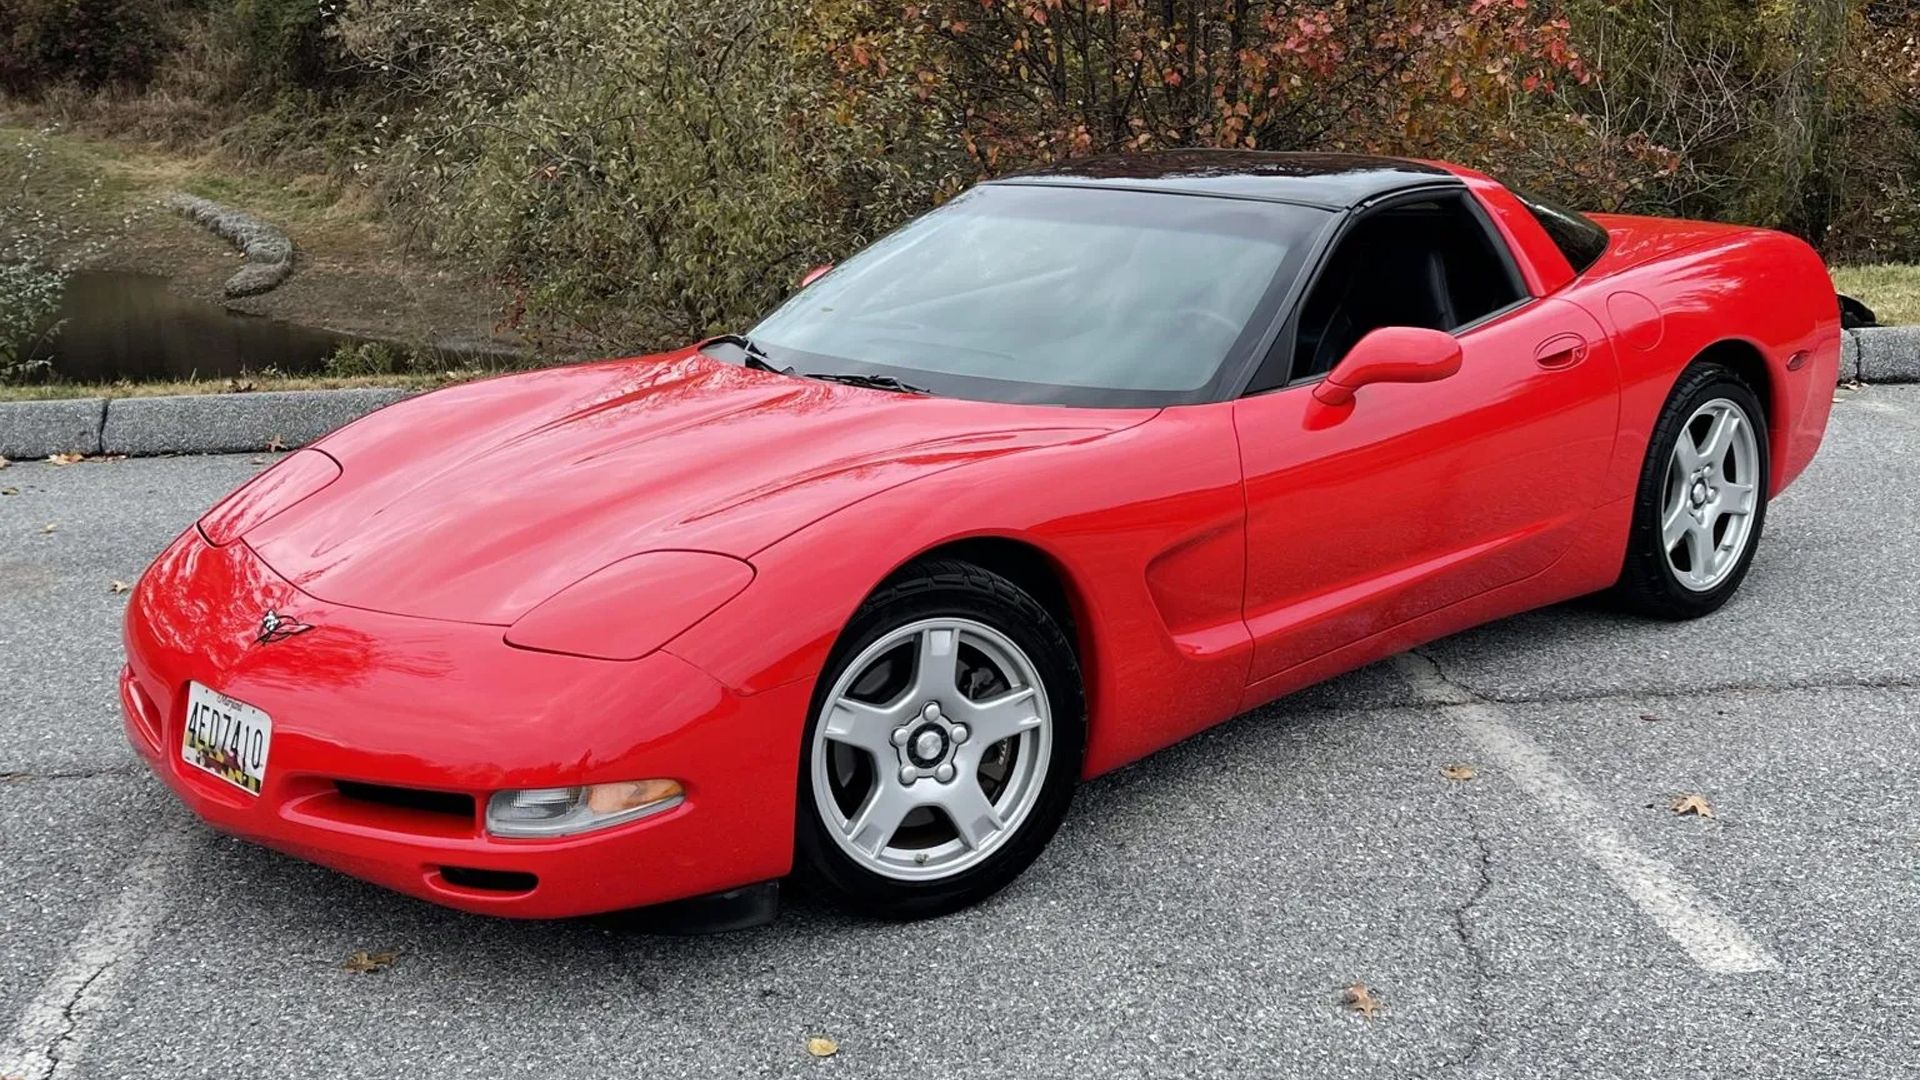 red 1997 Chevrolet Corvette Coupe parked